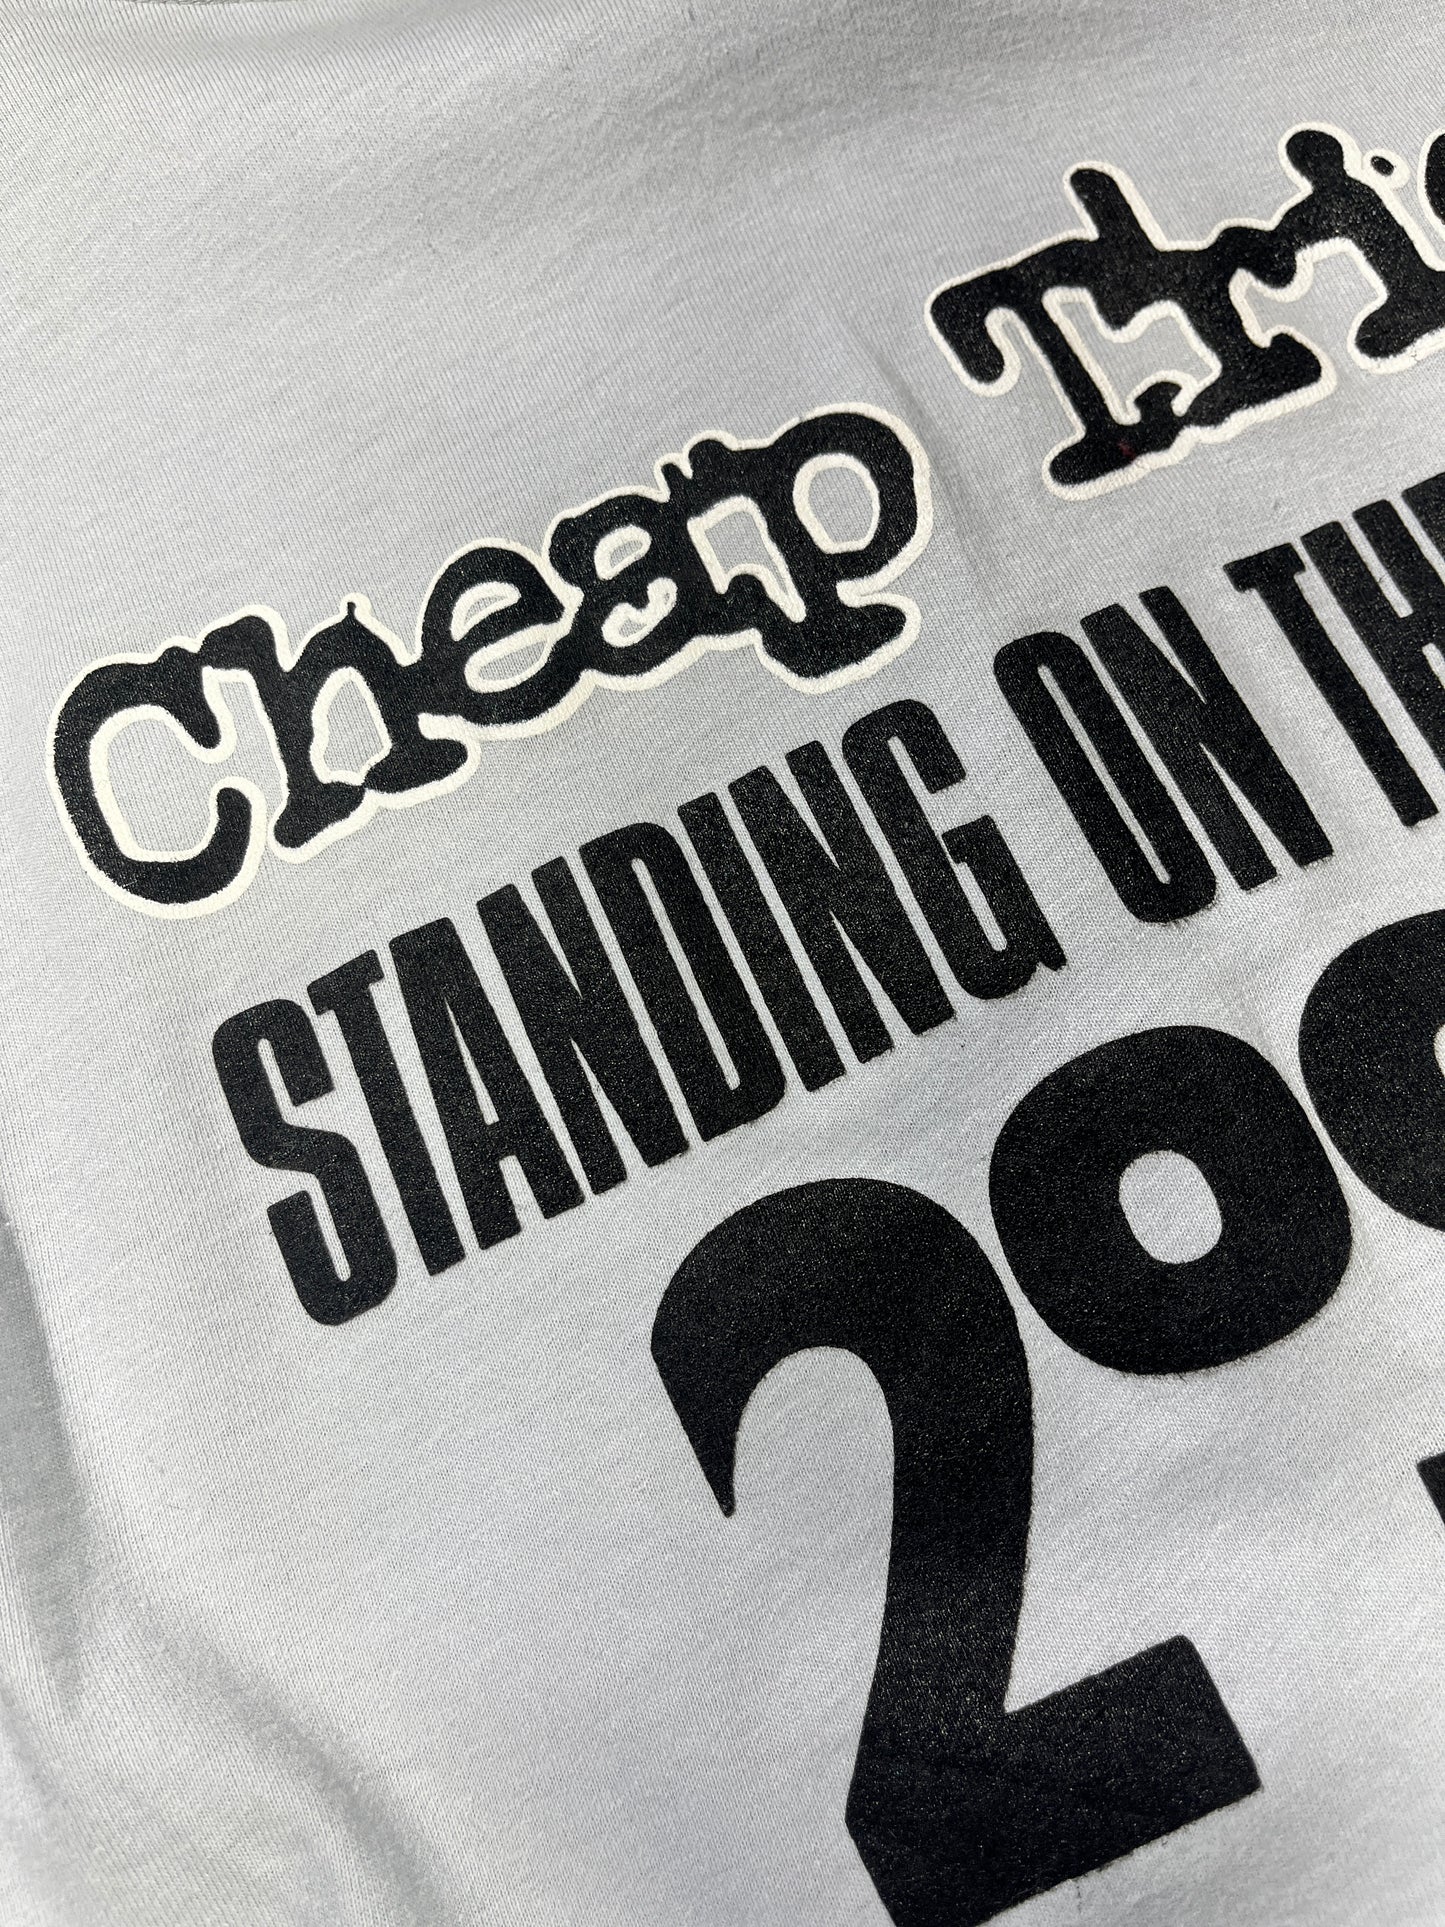 Vintage 1985 Cheap Trick T-Shirt Rare Rock Band Long Sleeve Tee 80's USA Made Standing On The Edge